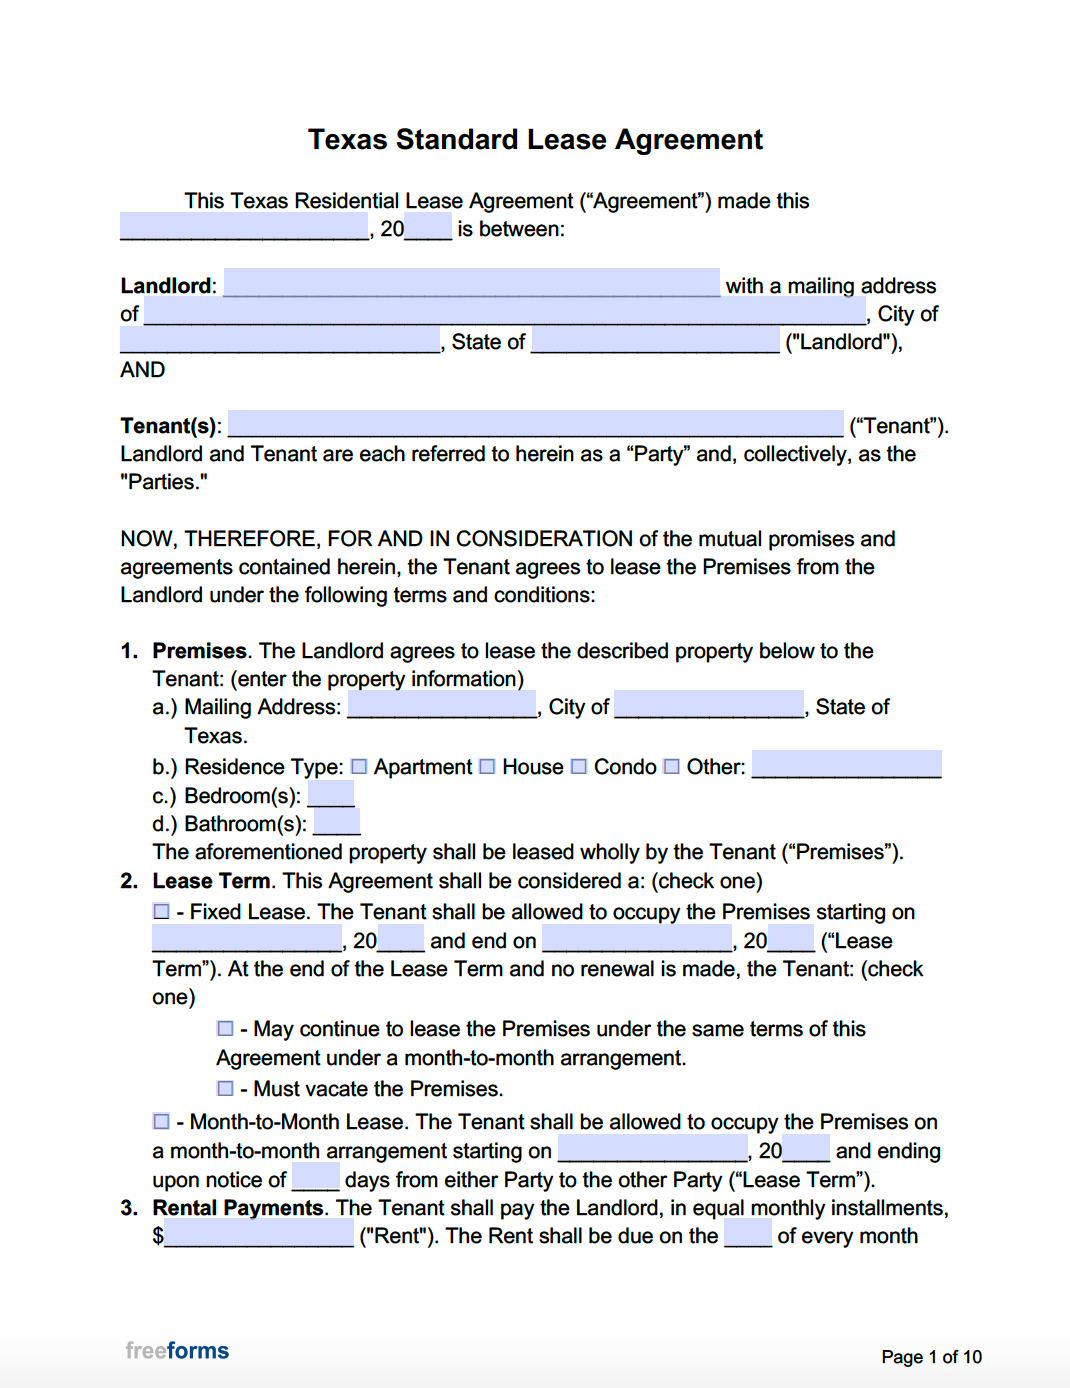 Download Free Texas Residential Lease Agreement Printable Lease Agreement Free Texas Standard